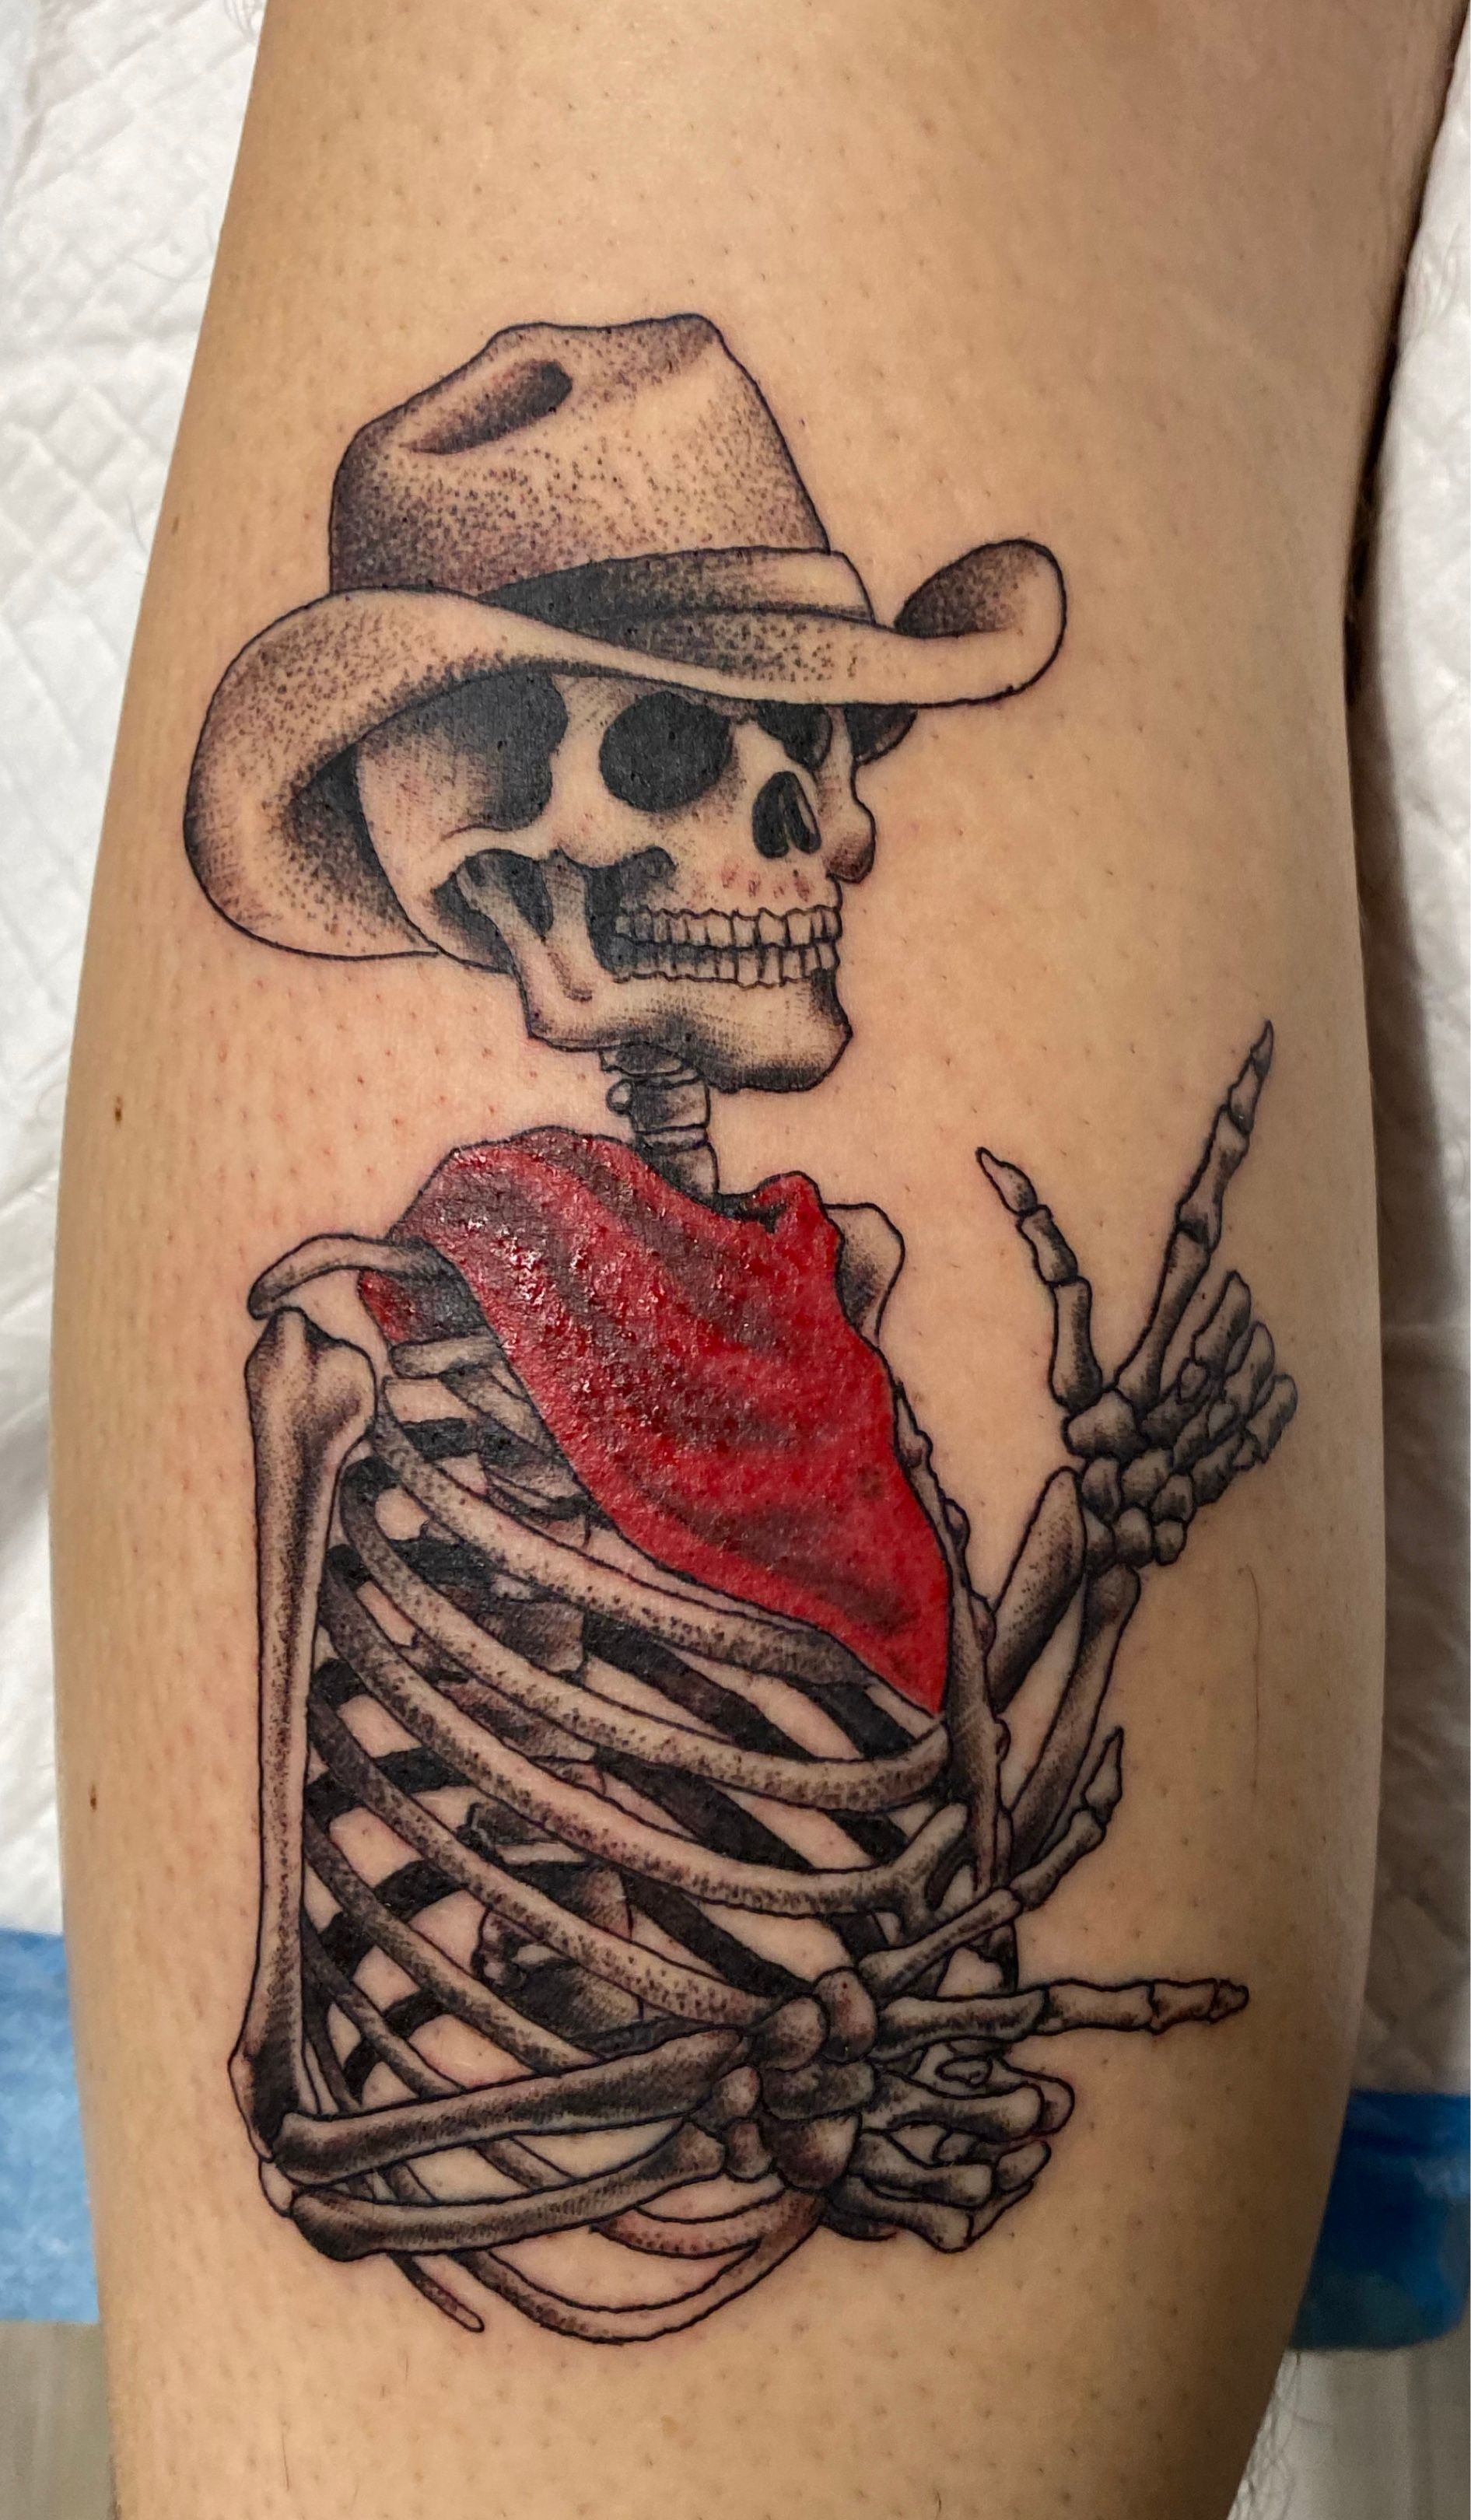 The Silver Key on Twitter Smoking skull cowboy tattoo done by Richard  Young smokingskull smokingcowboy americantraditionaltattoo  americantraditional richardyoungtattoo eternalinktattoo midwesttattoo  tagtheqc davenportiowa httpstco 